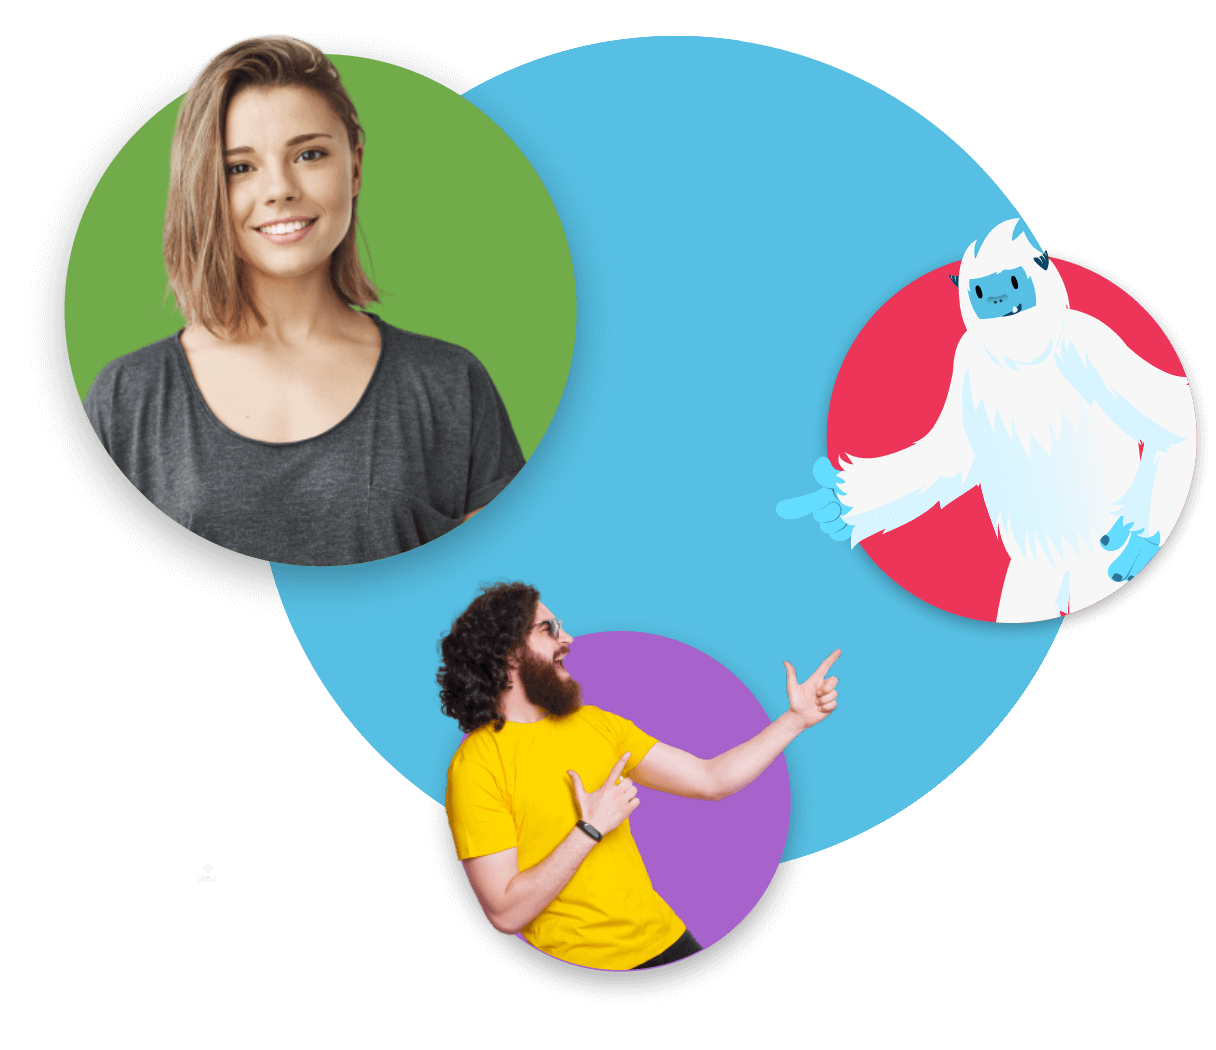 Circle image of woman smiling, Carl the yeti pointing towards a man, and the man pointing back.